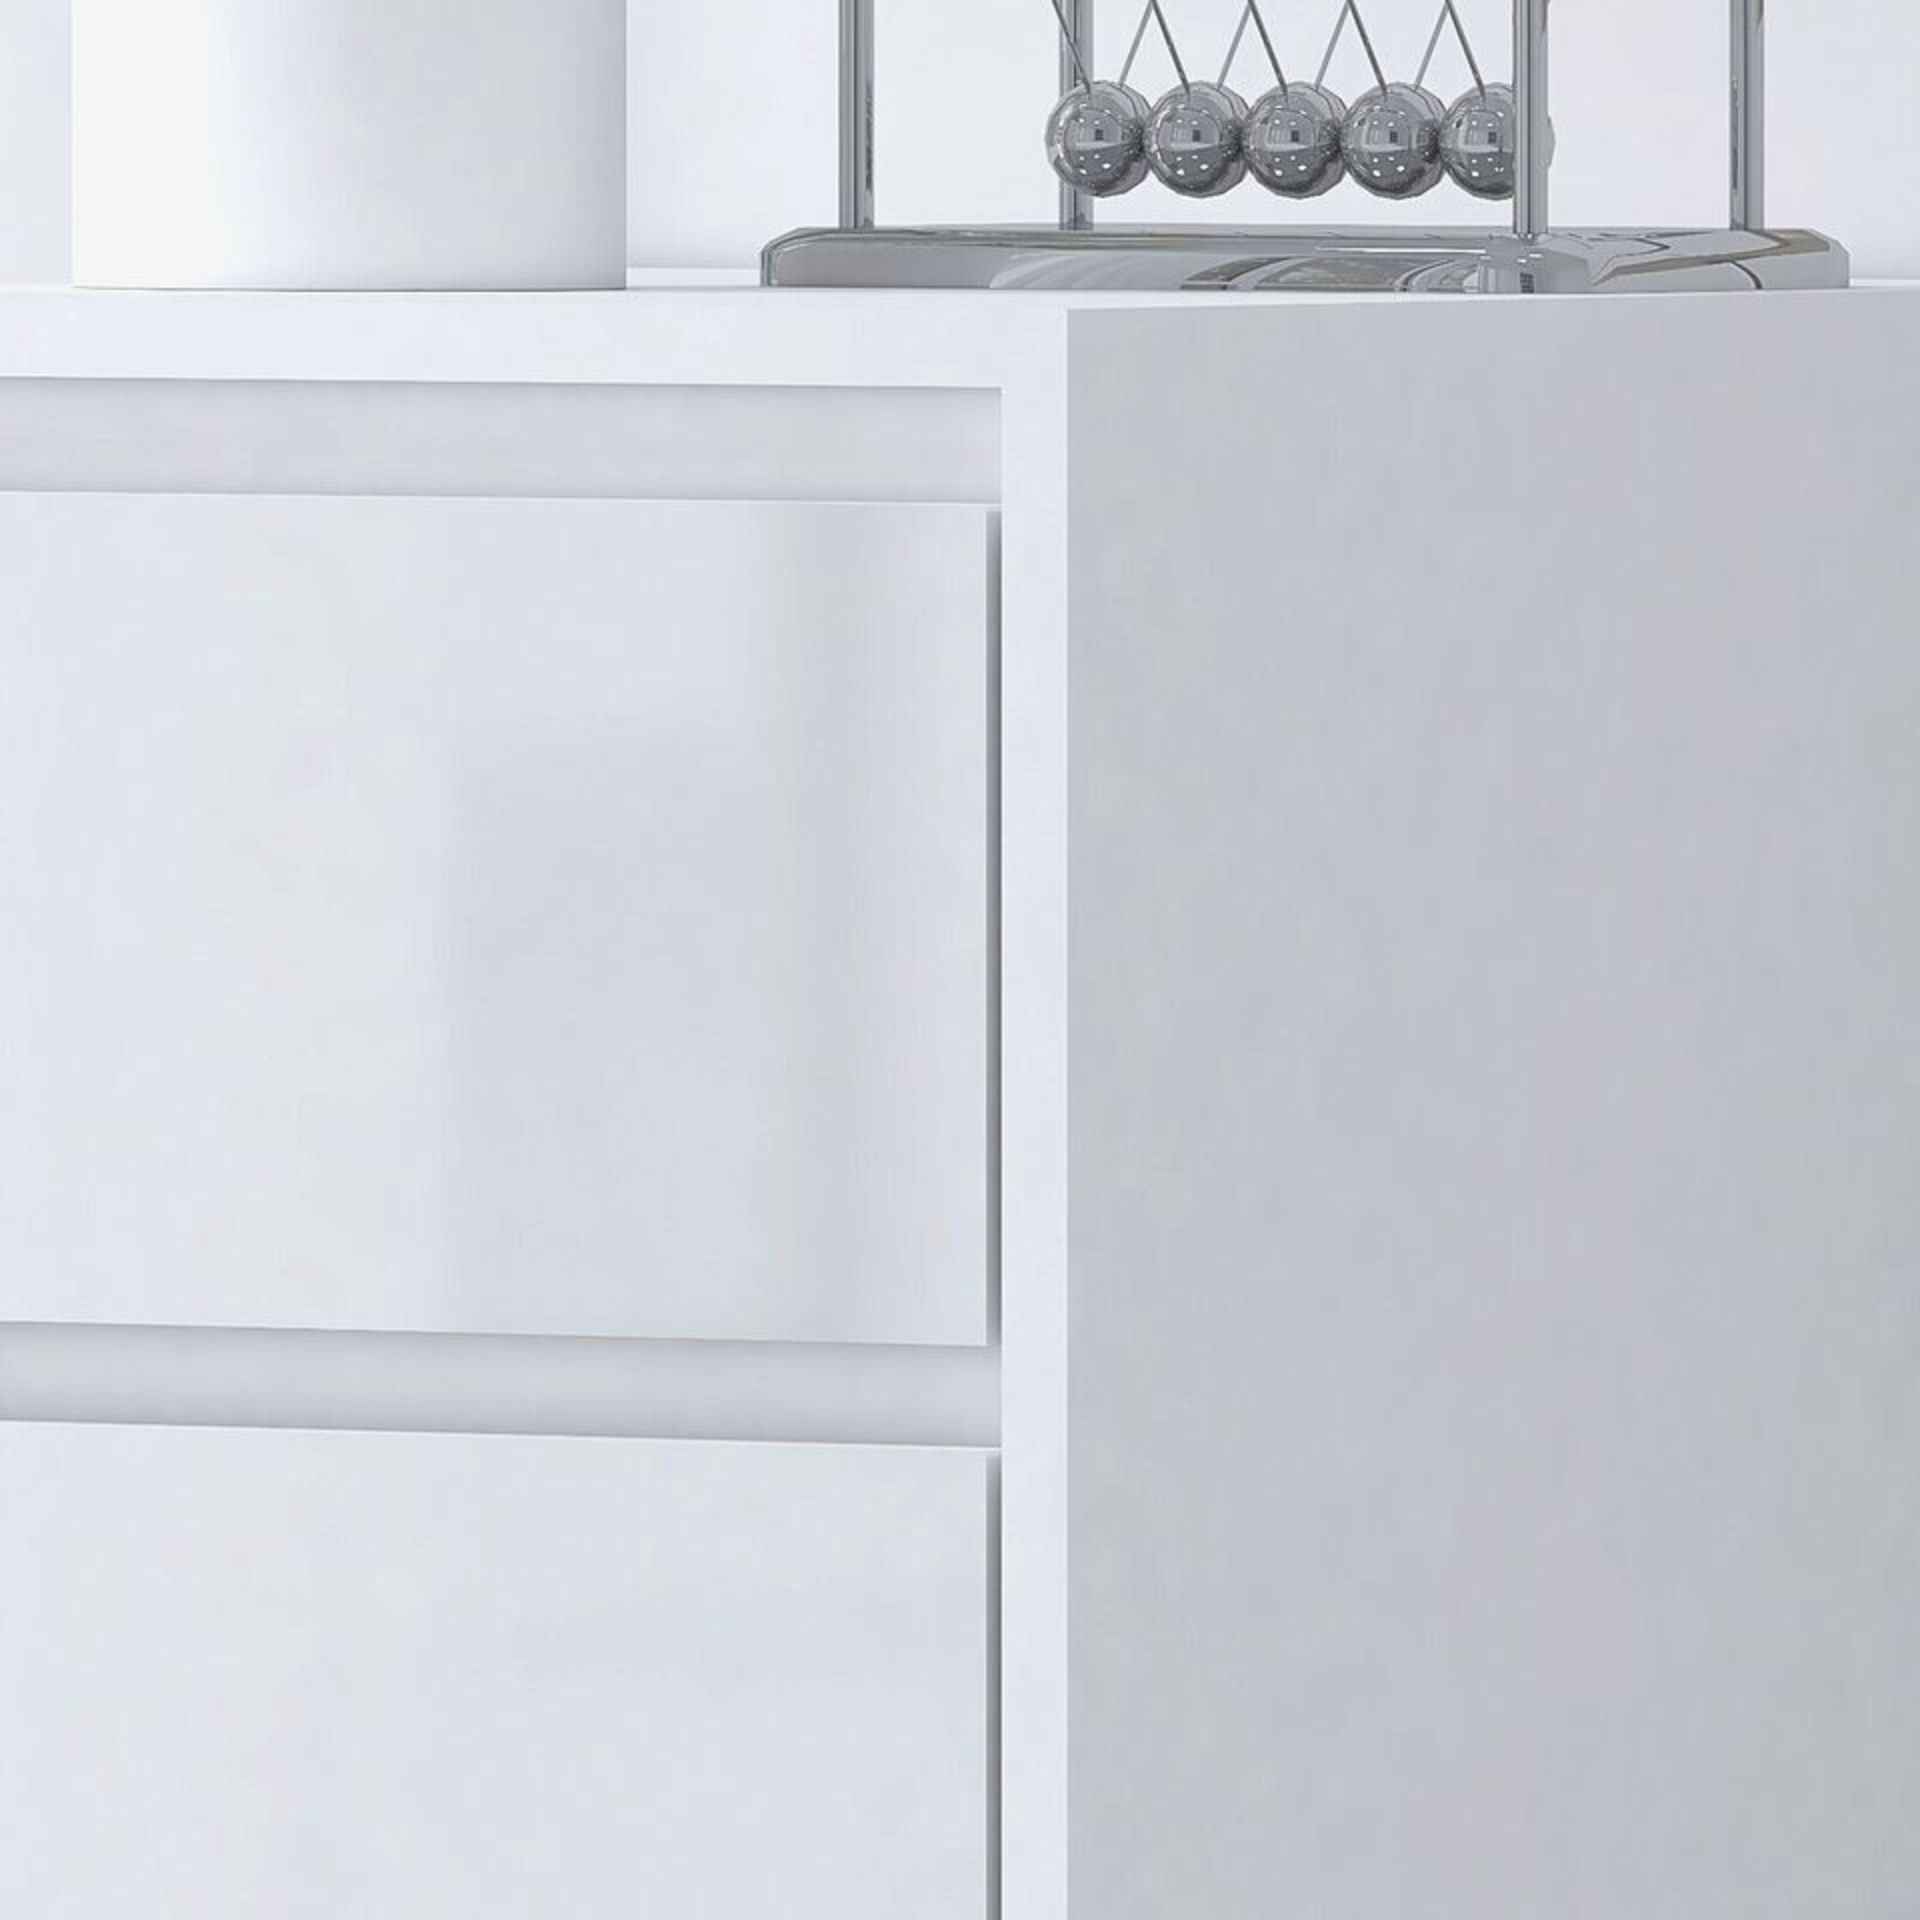 PAIR OF HIGH GLOSS WHITE BEDSIDE CABINET UNIT MODERN HANDLELESS DESIGN - H64CM X W40CM - Image 8 of 9